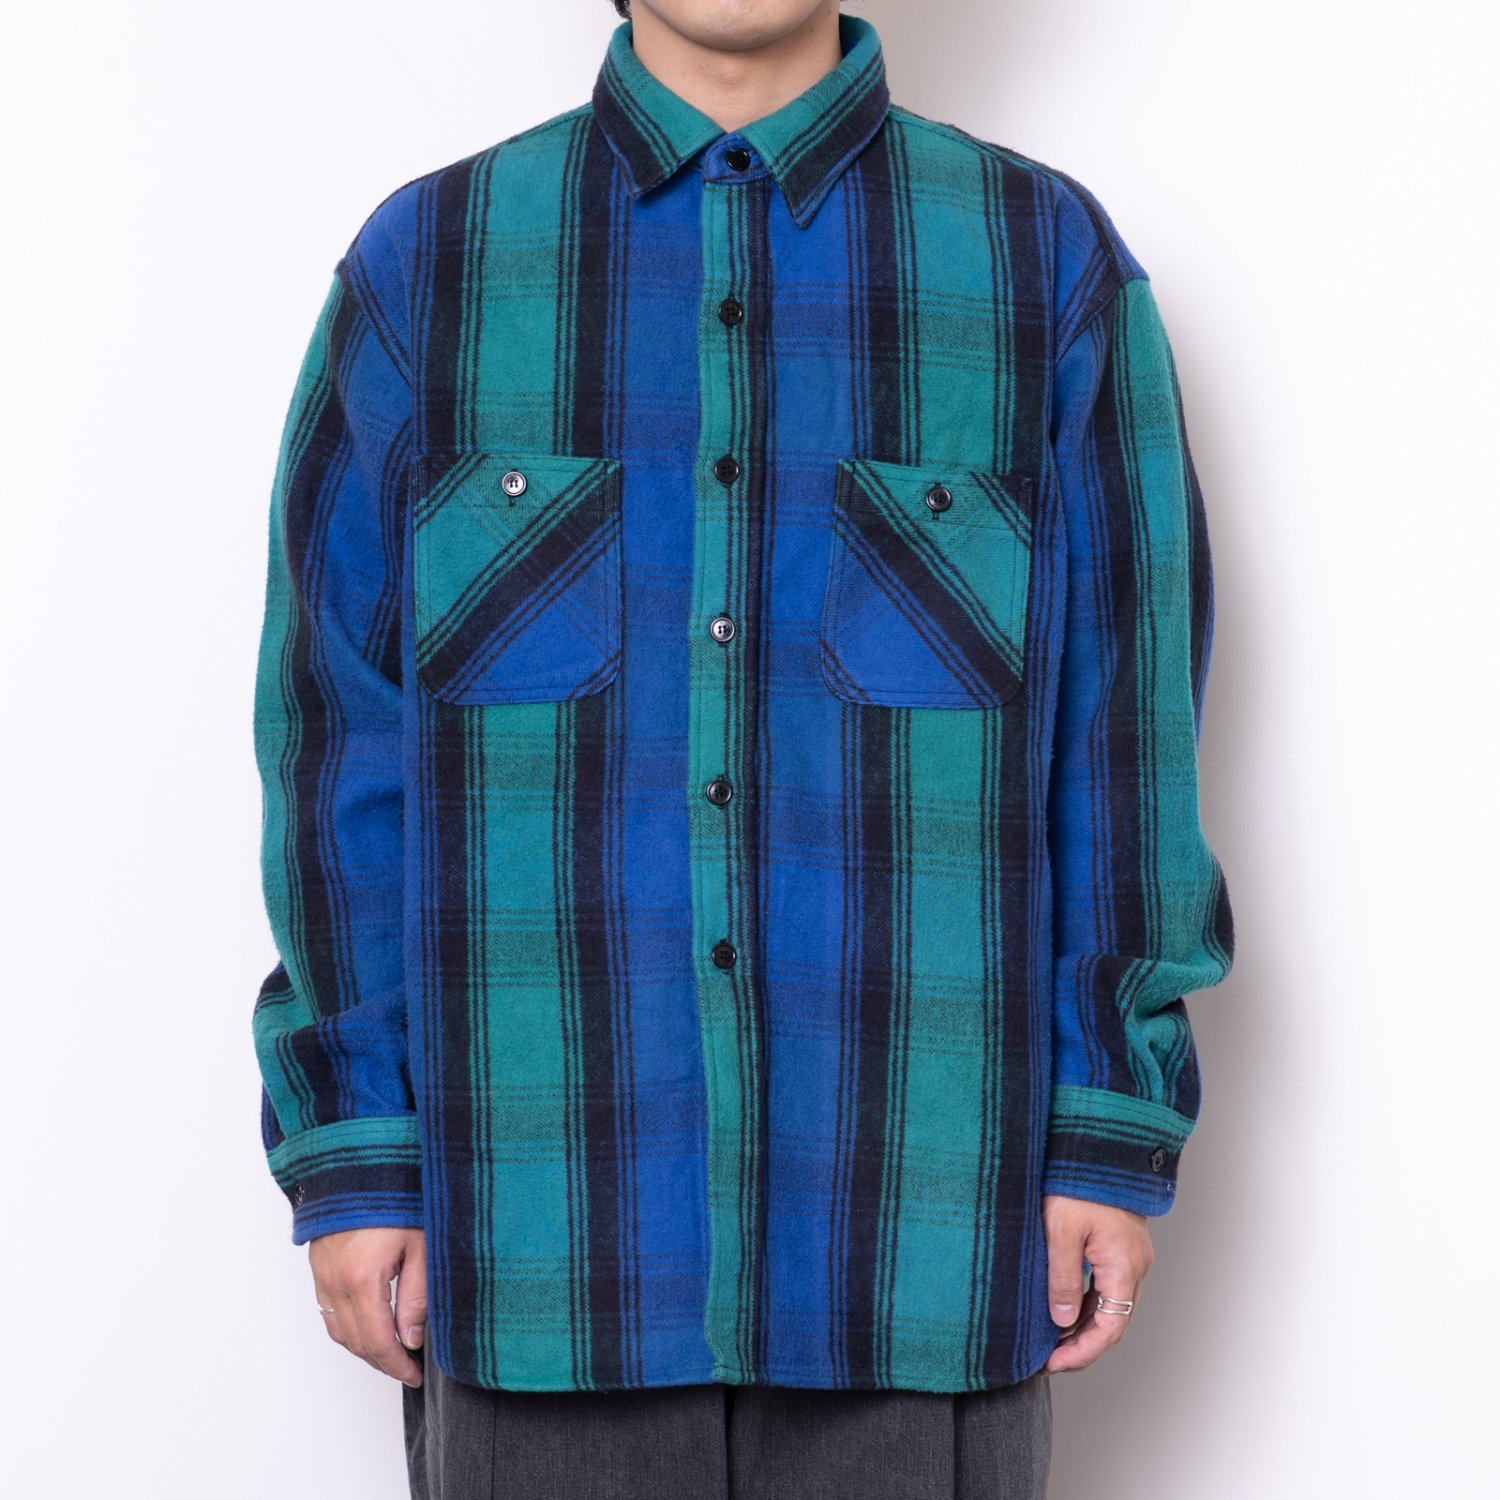 UNUSED * US2094 Heavy Cotton Flannel Check Shirt * Green/Blue